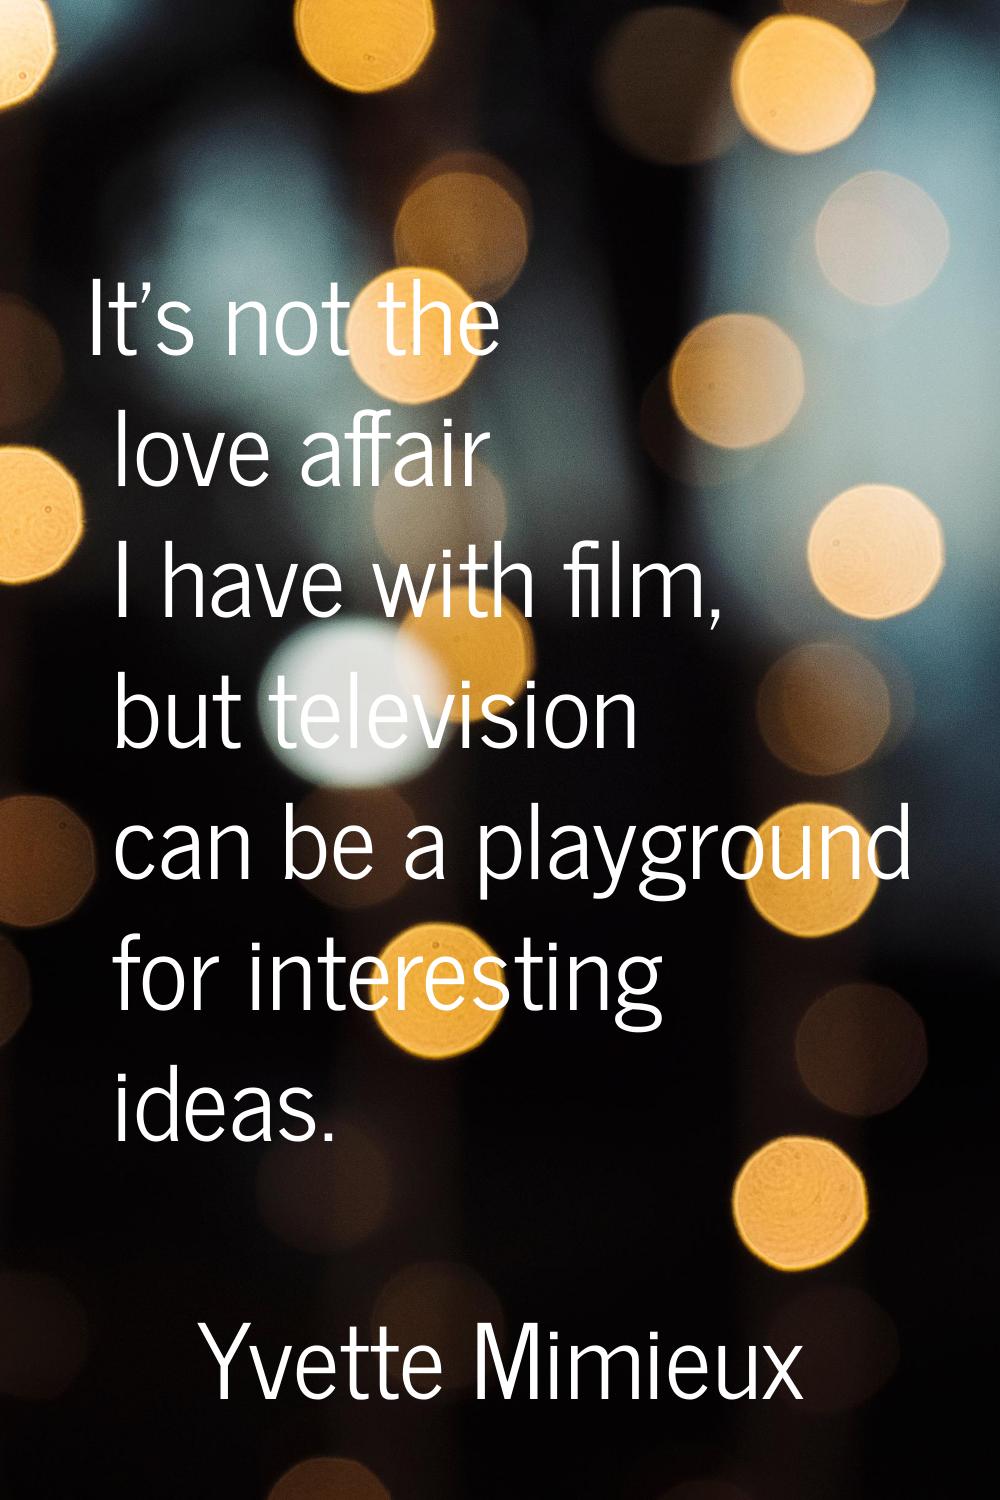 It's not the love affair I have with film, but television can be a playground for interesting ideas